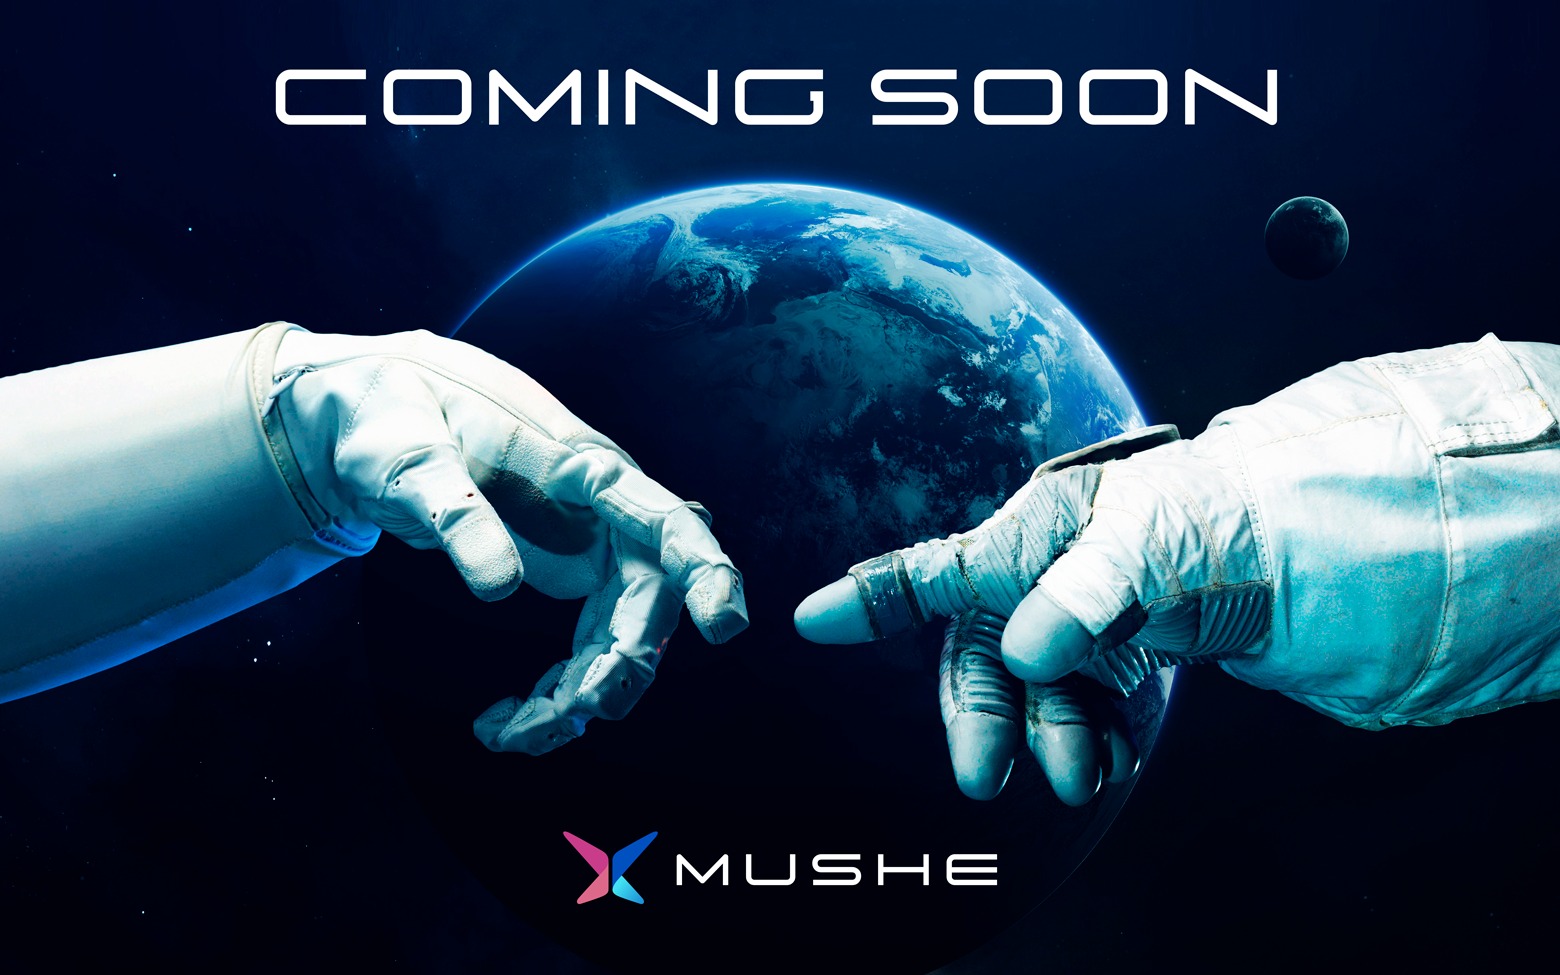 2 Cryptocurrencies That Are Going To Explode In 2022: MUSHE TOKEN (XMU) And The SANDBOX (SAND) 